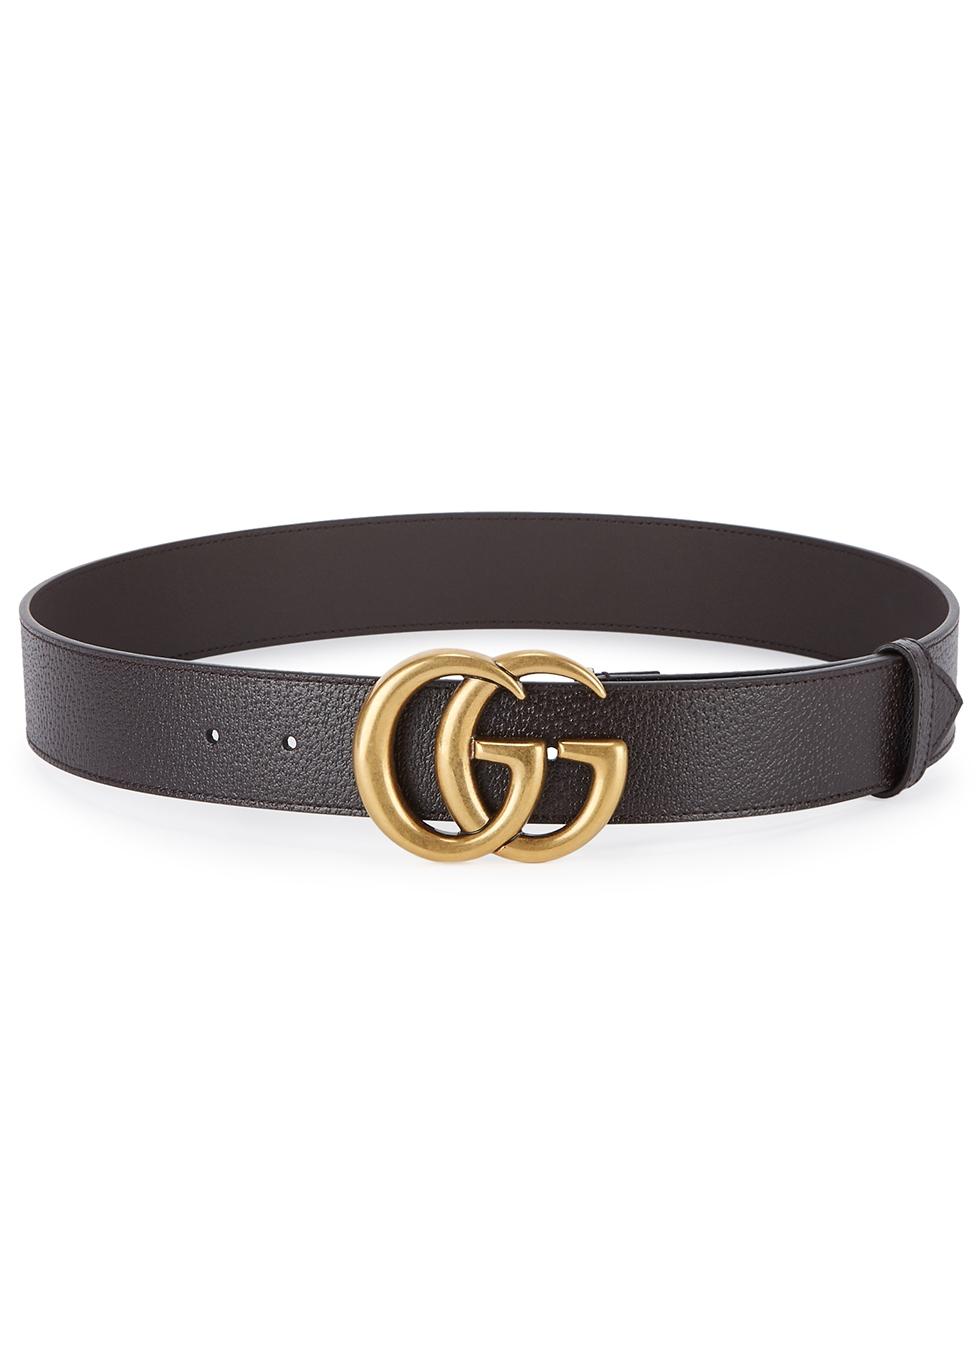 Gucci GG Dark Brown Grained Leather Belt for Men - Save 11% - Lyst